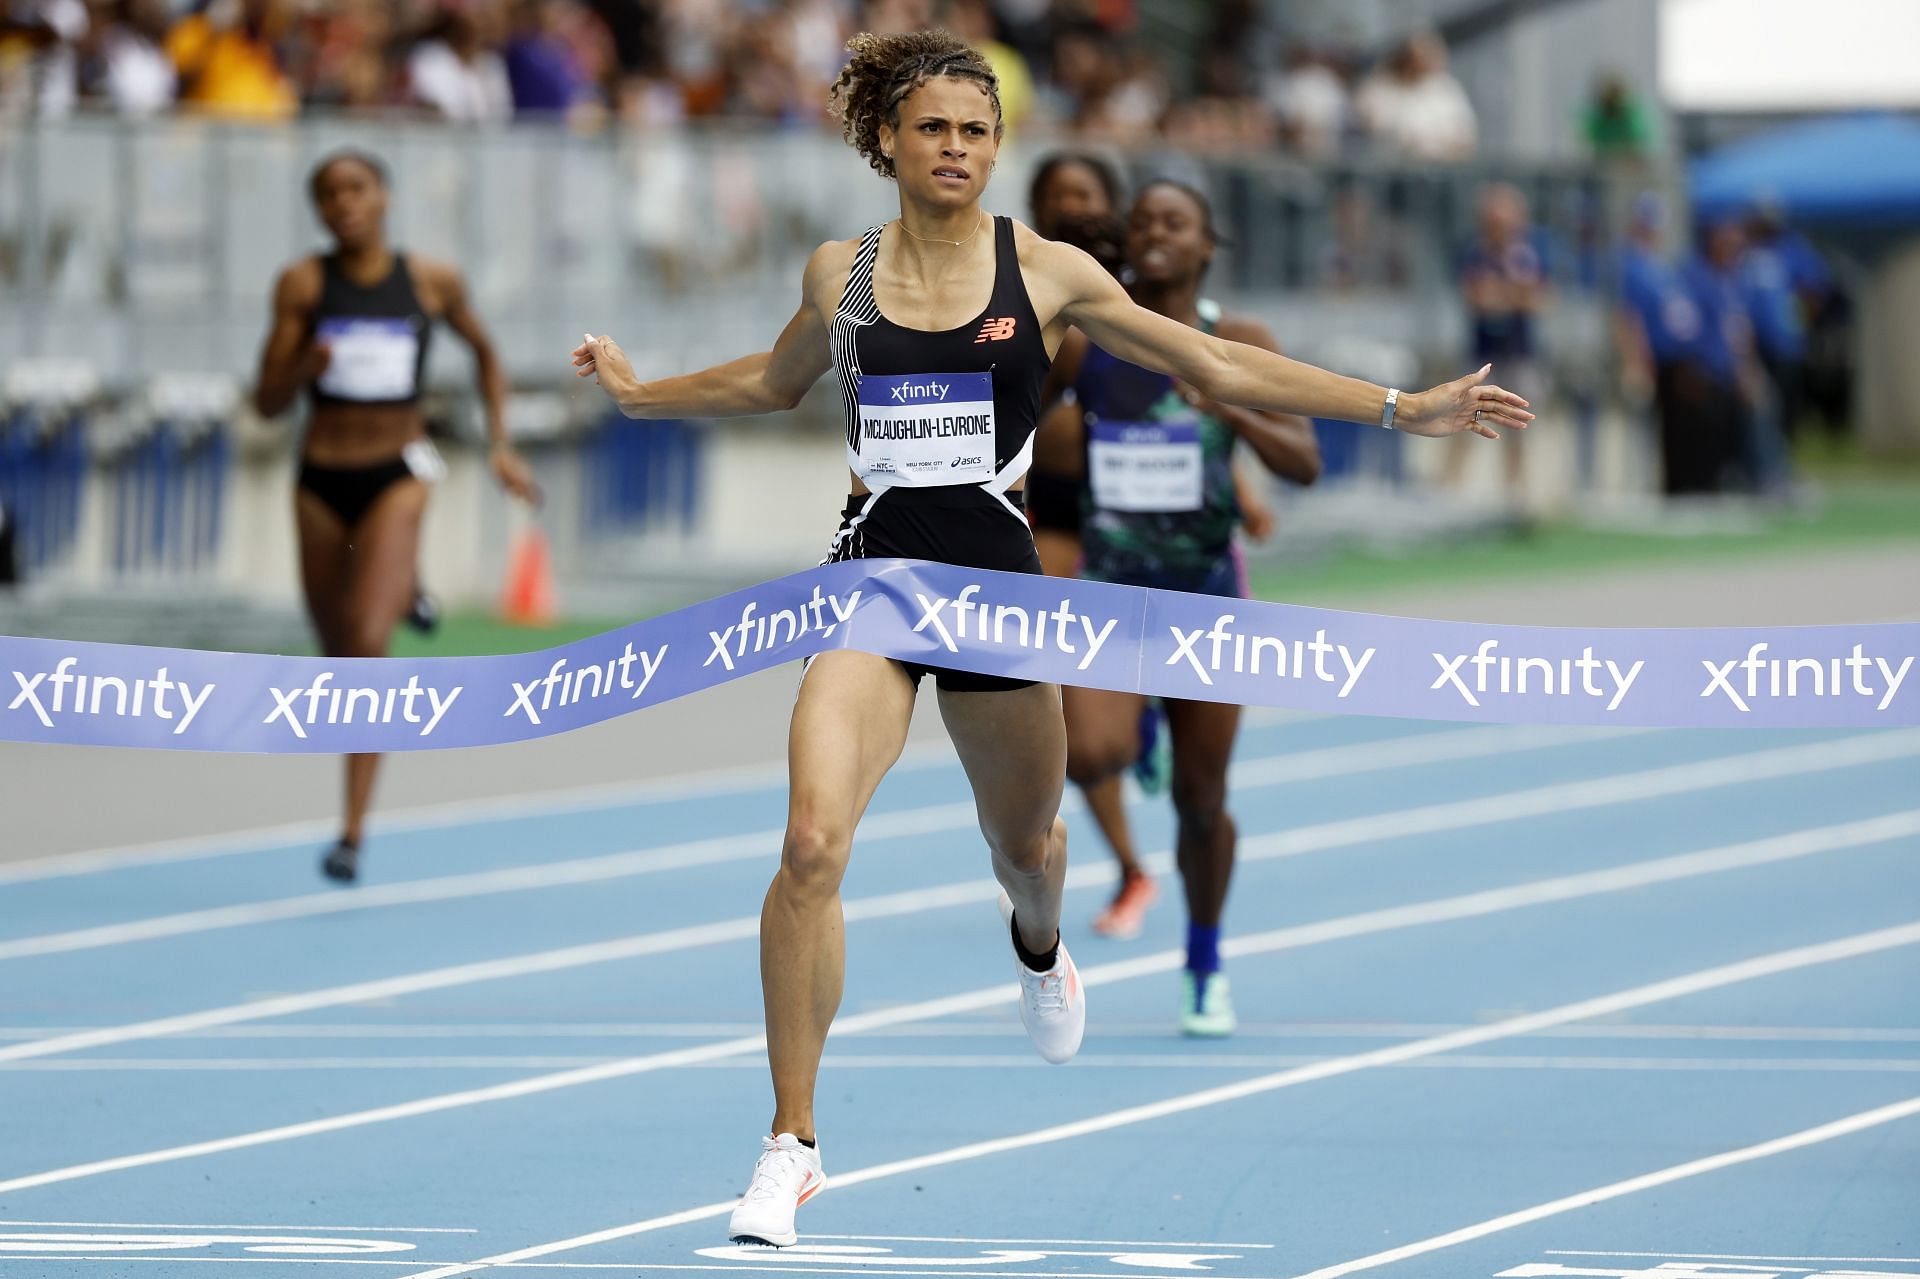 Sydney McLaughlin-levrone reacts after winning the Xfinity women&#039;s 400m during the 2023 USATF NYC Grand Prix at Icahn Stadium on June 24, 2023 in New York City